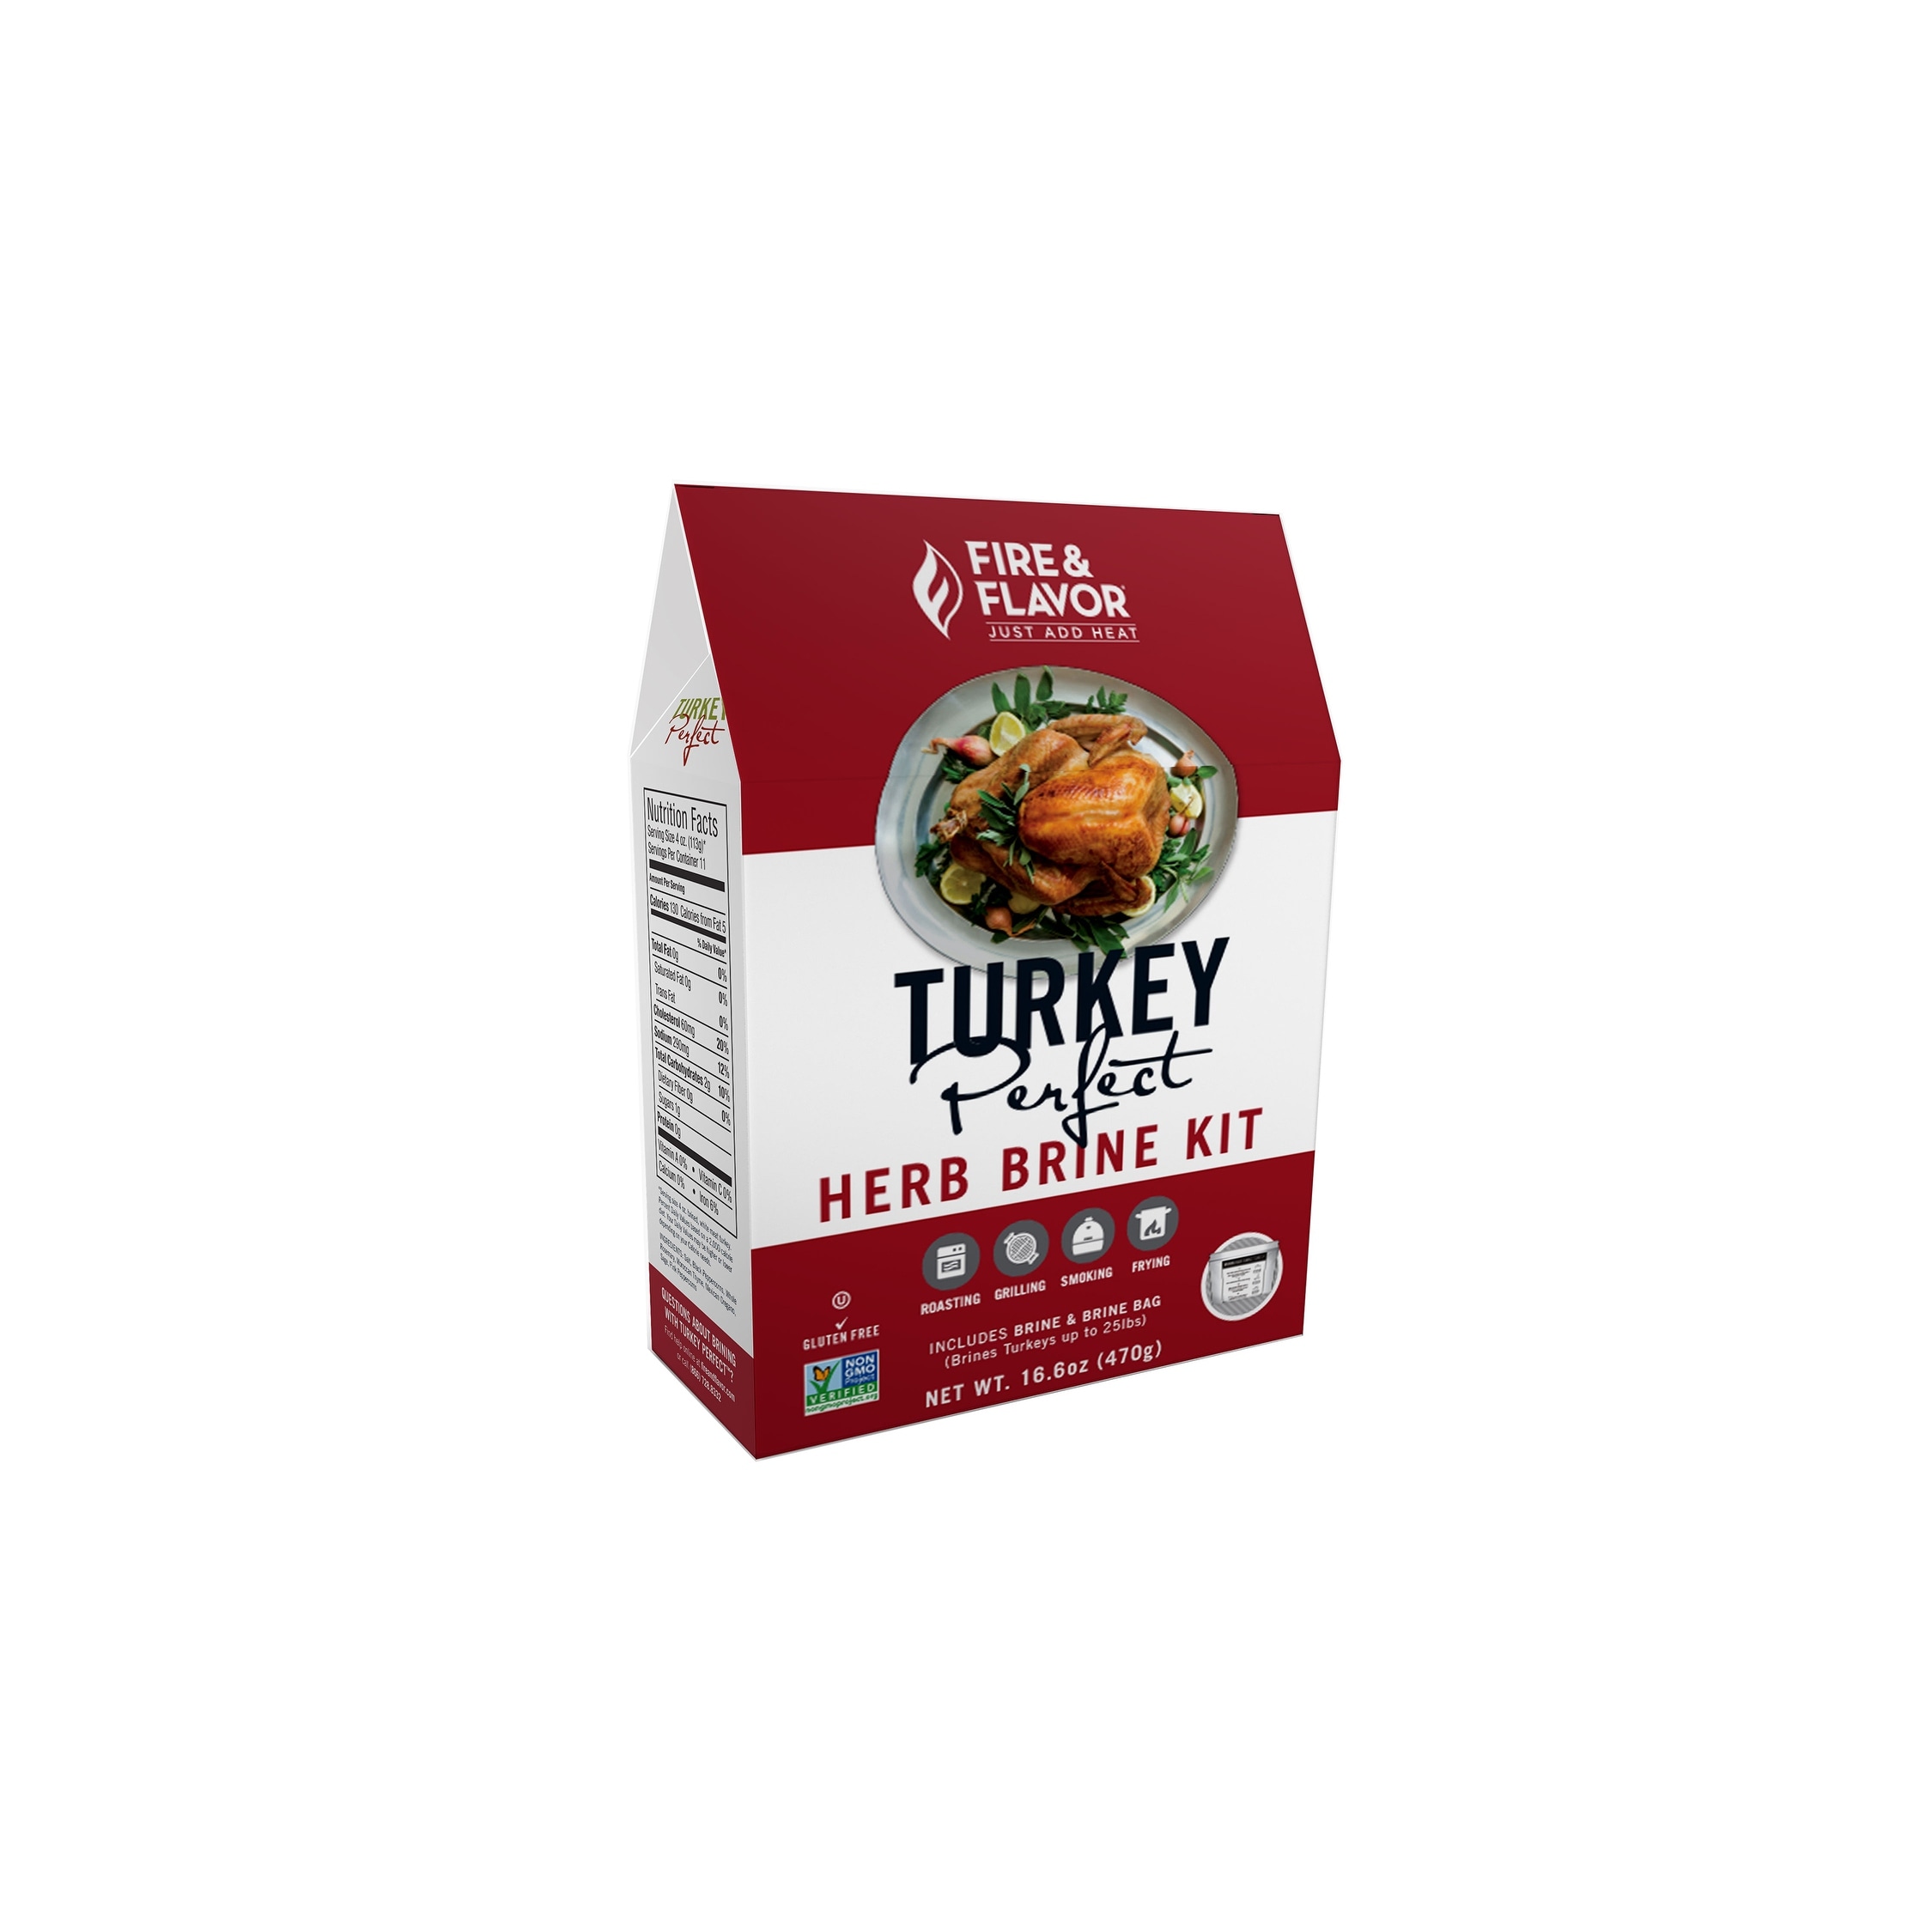 https://ak1.ostkcdn.com/images/products/is/images/direct/3cd539090e700d456dc2a45ef6783258ae82b351/Fire-%26-Flavor-FFB138-Turkey-Perfect-Brine-Kit%2C-Herb.jpg